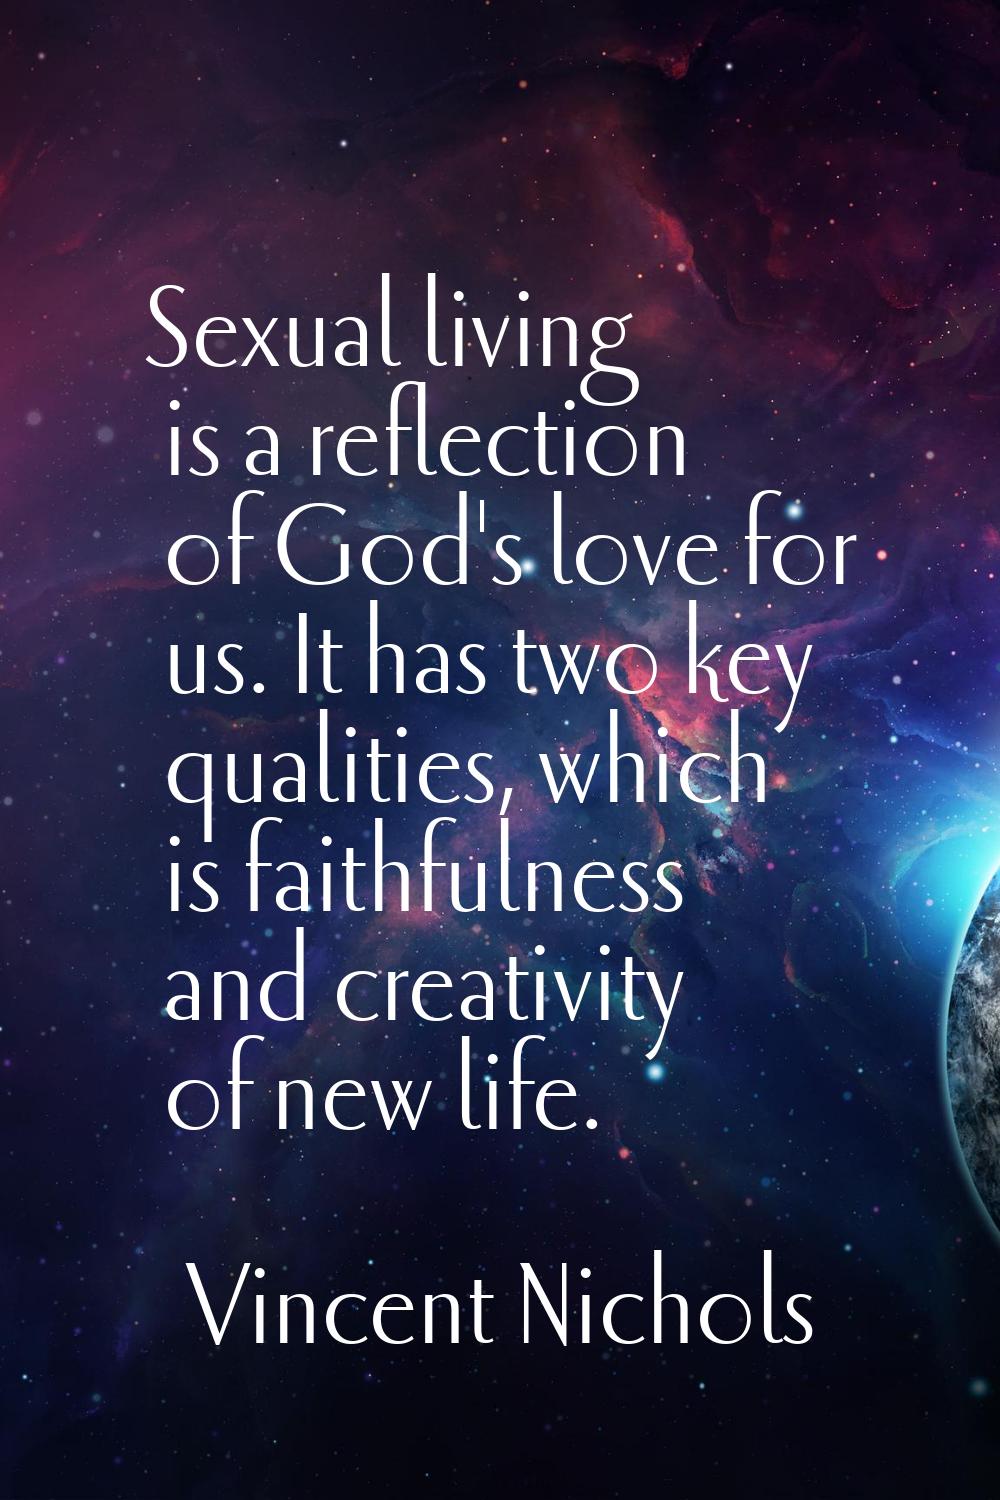 Sexual living is a reflection of God's love for us. It has two key qualities, which is faithfulness